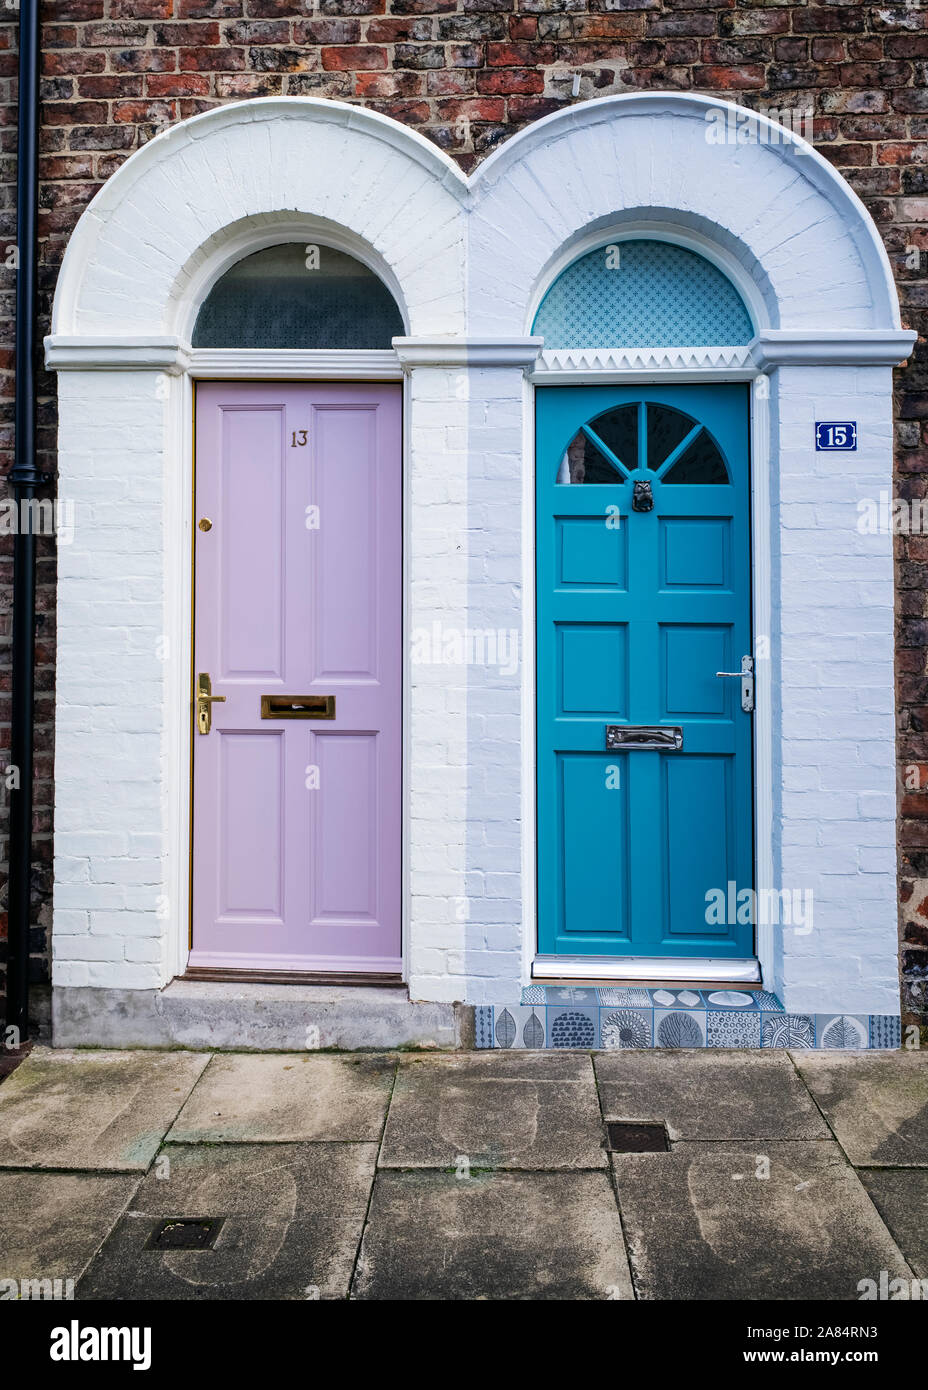 Merging, complementary but contrasting entrances to two Victorian properties, City of York, Yorkshire, UK Stock Photo